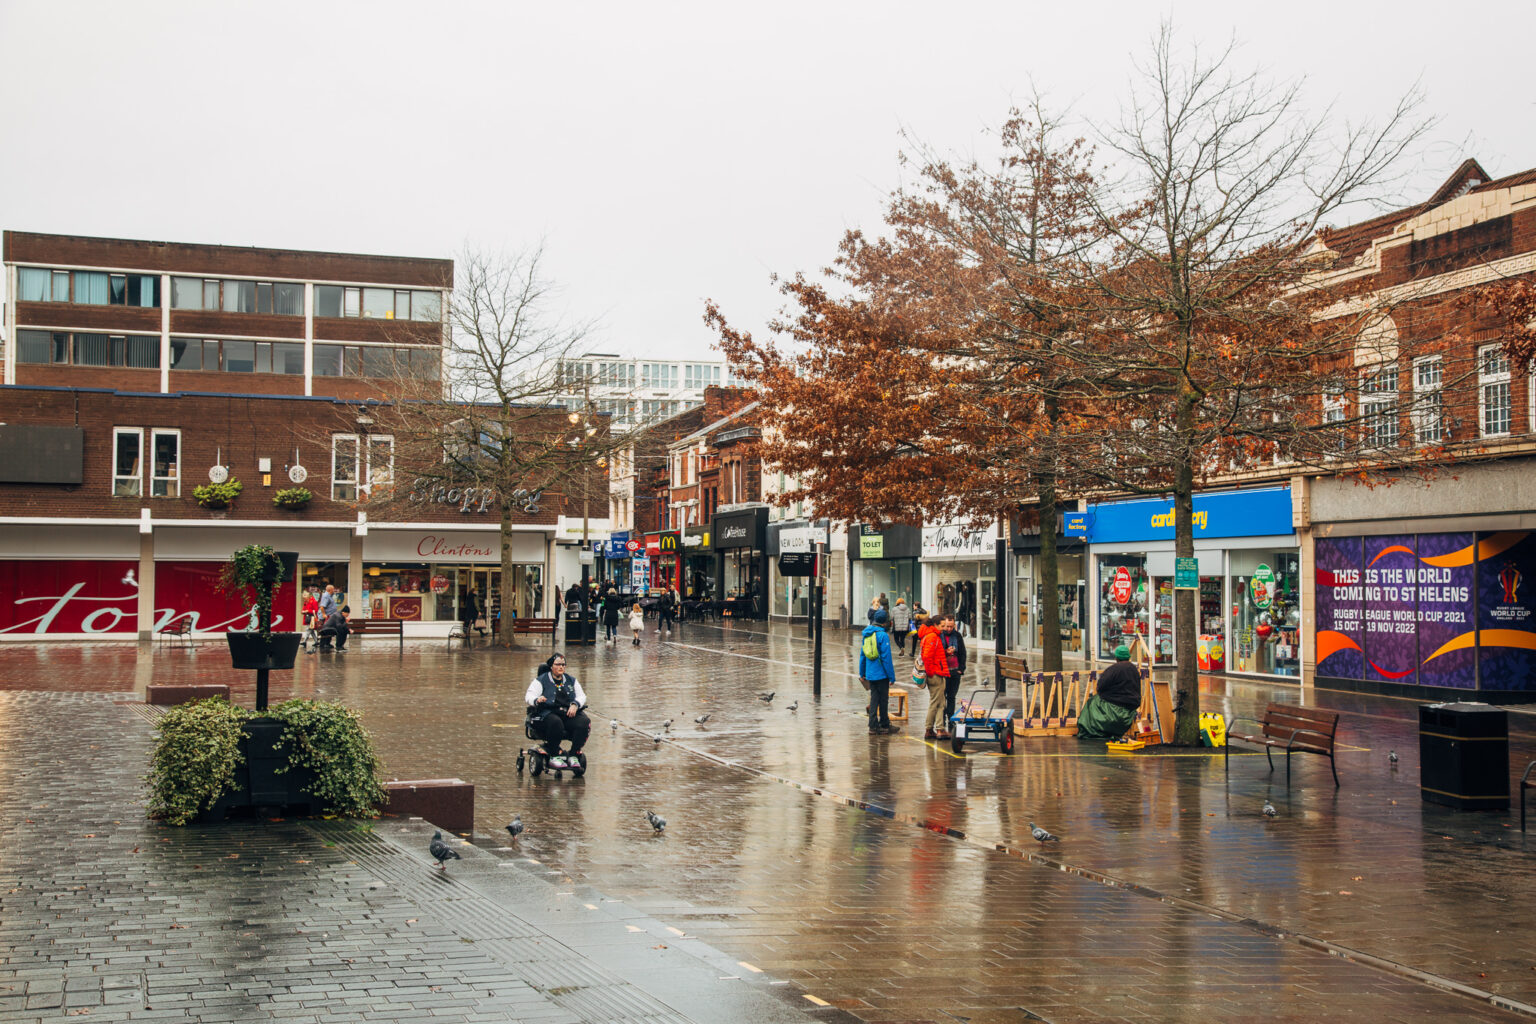 A photograph of St Helens town centre on a rainy day in autumn